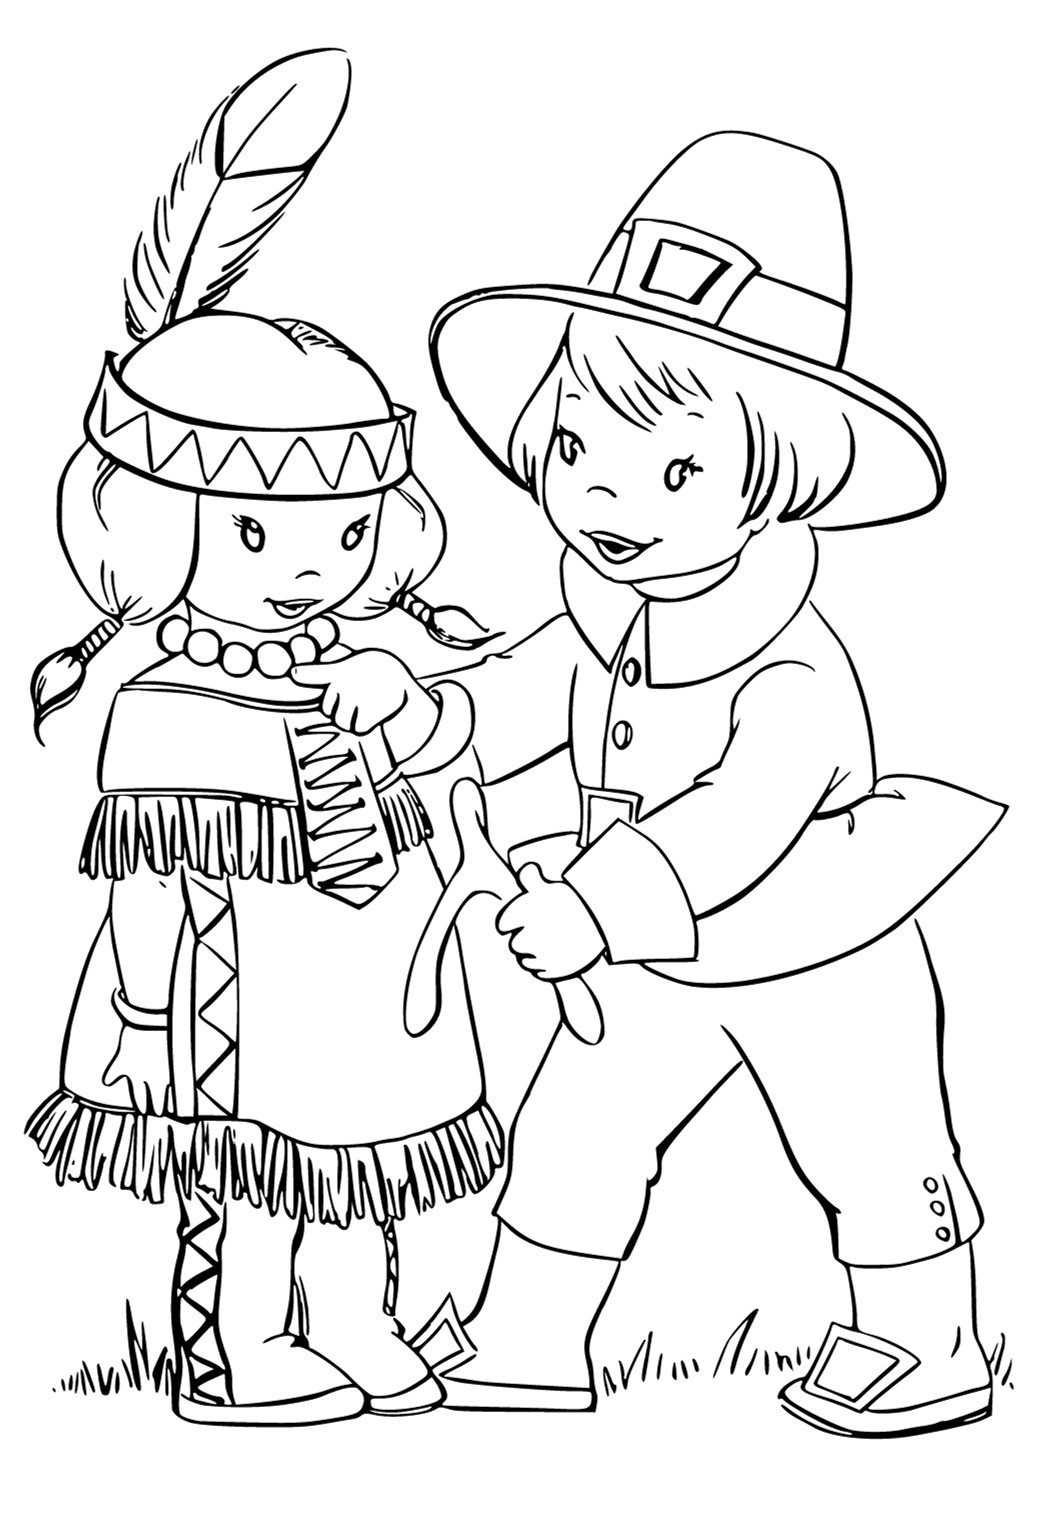 Free printable pilgrim meeting coloring page for adults and kids